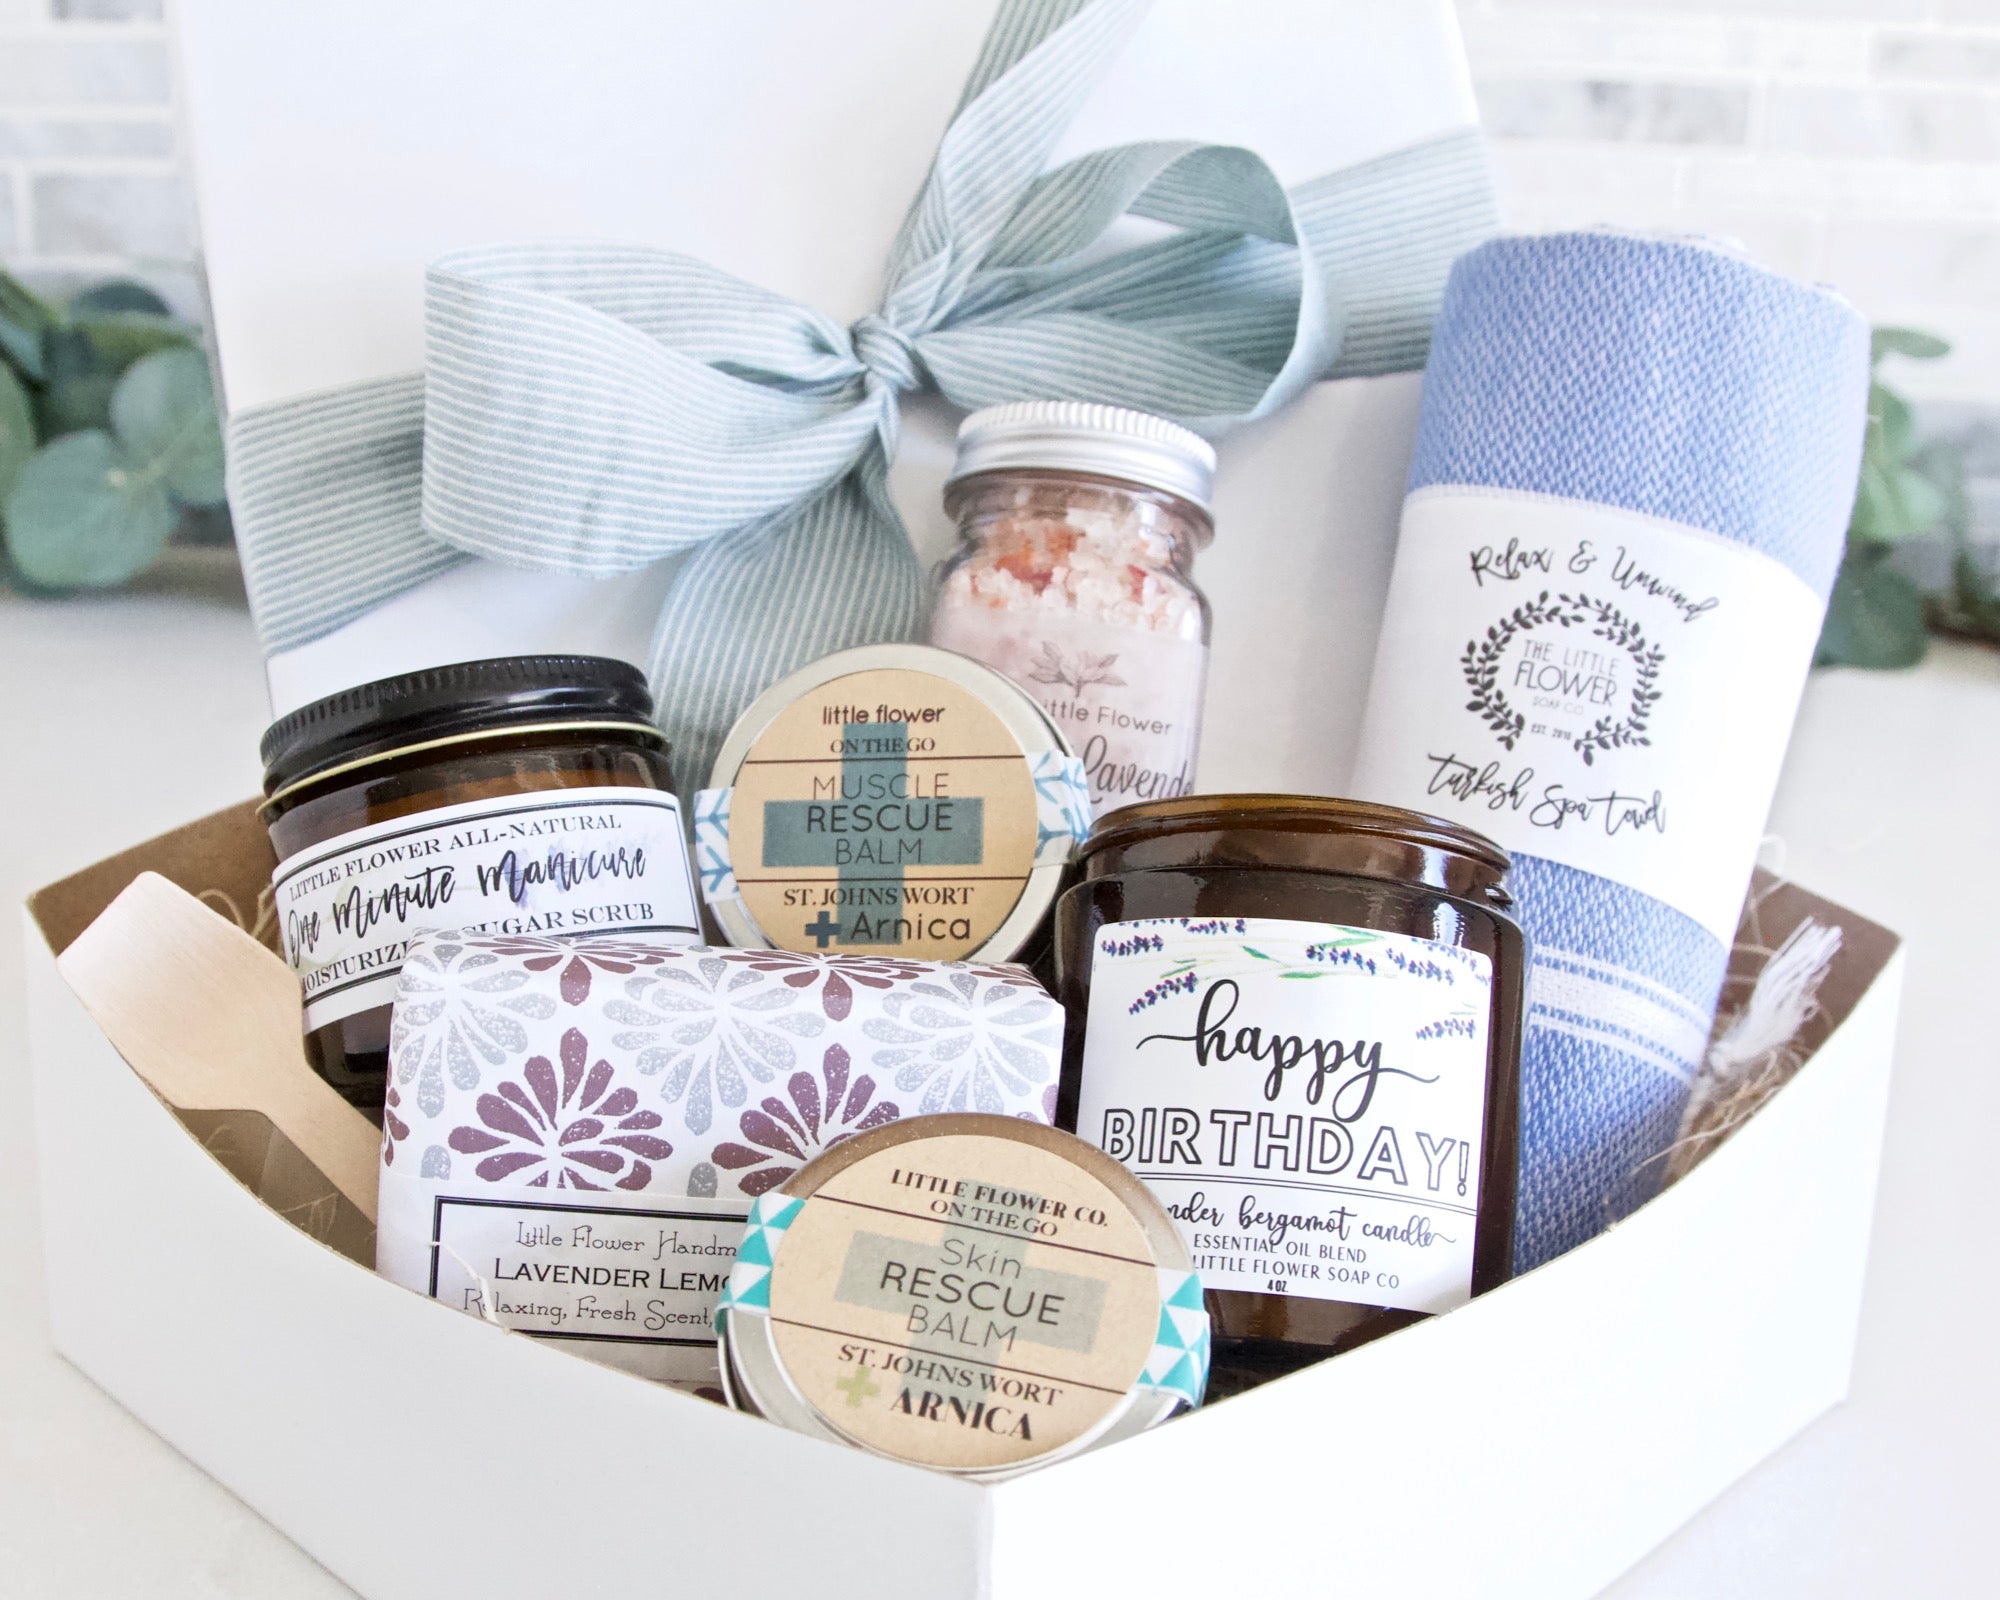 Birthday Gifts for Women, Unique Happy Birthday Relaxing Spa Bath Set Gift Baskets Ideas for Her, Mom, Sister, Friends, Best Pampering Care Gift Box